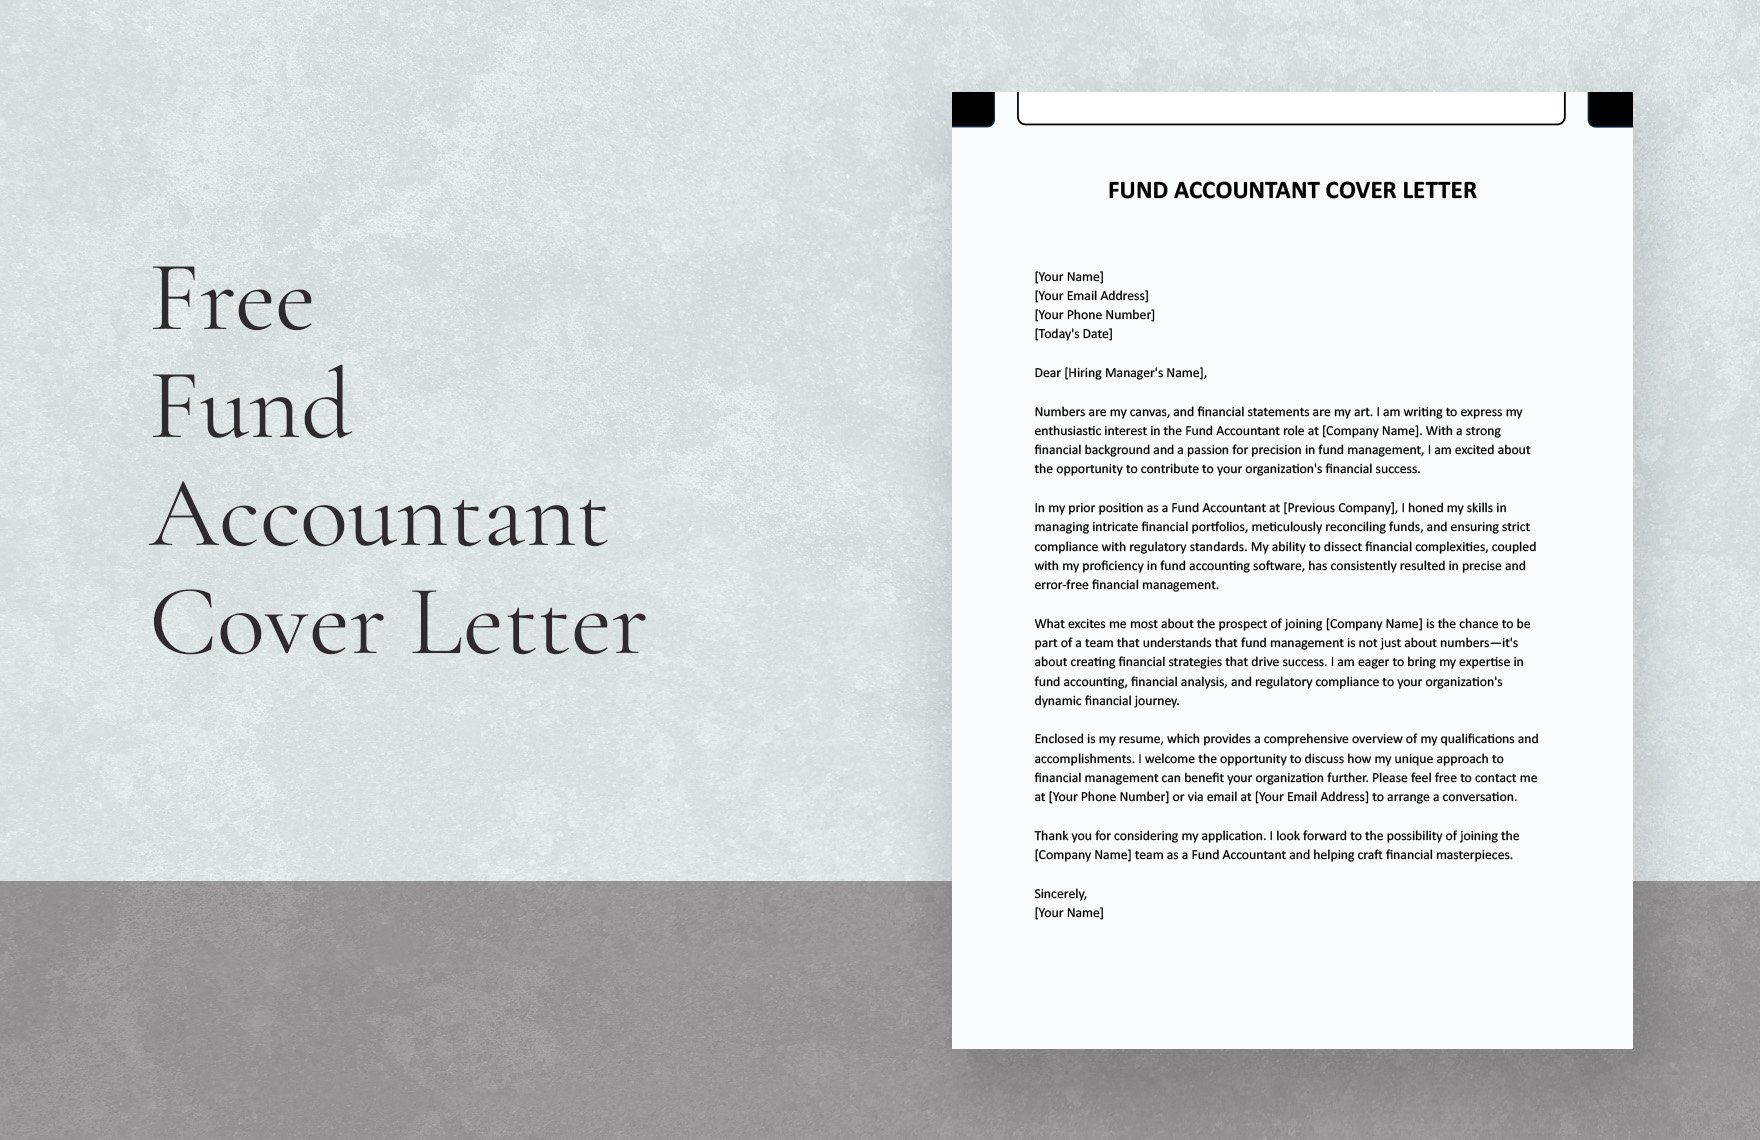 Fund Accountant Cover Letter in Word, Google Docs